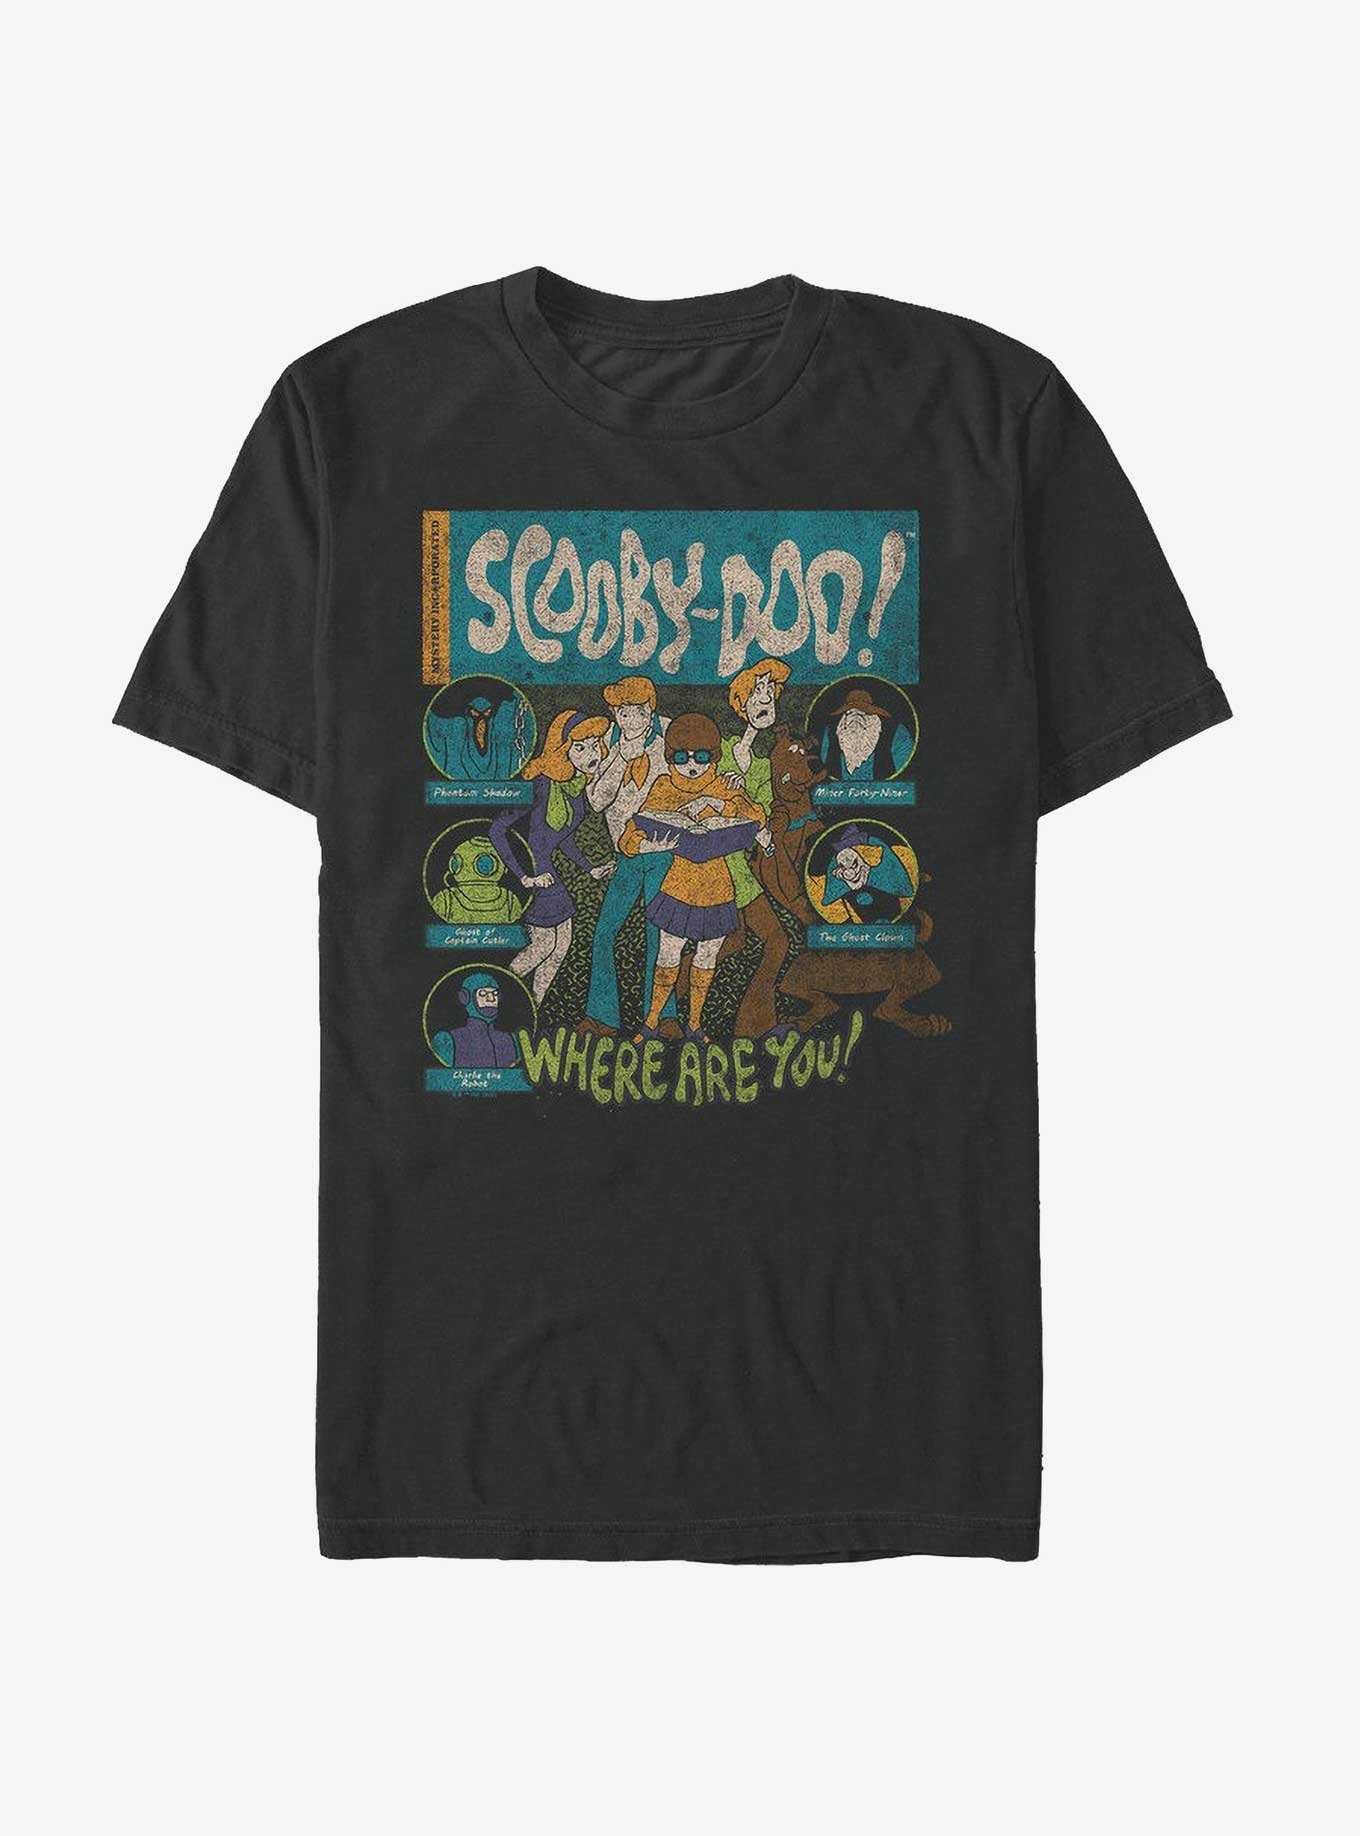 Scooby Doo Mystery Poster T-Shirt, , hi-res